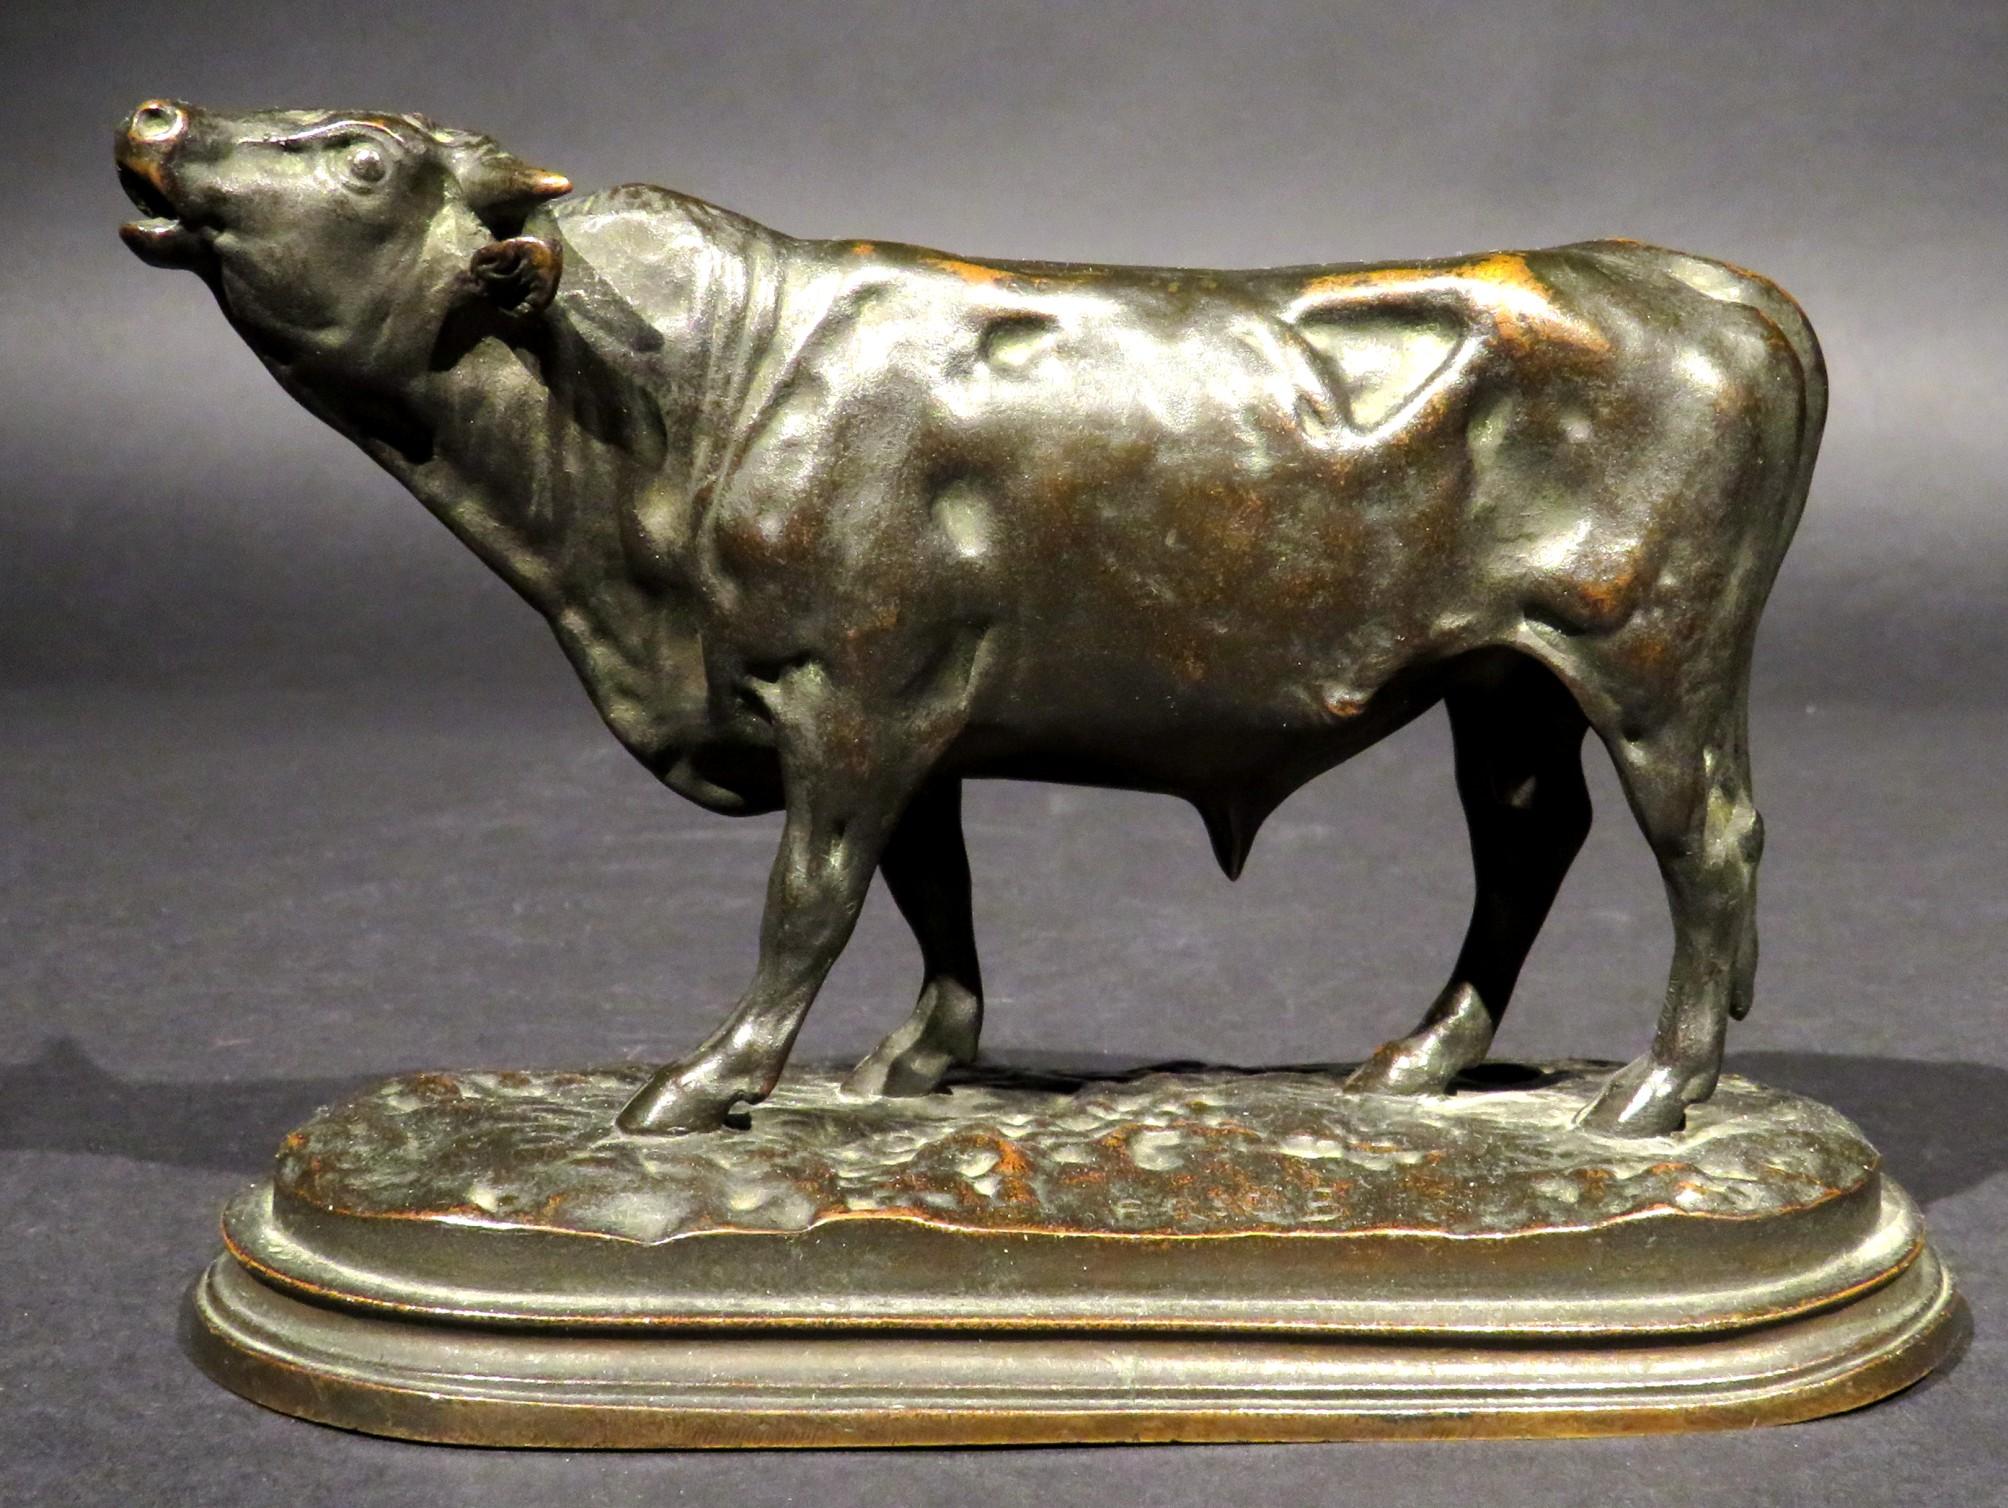 Although there is seemingly no apparent foundry mark, this finely cast & patinated animalier bronze known as ‘Bull’ or ‘Taureau Beuglant’ is exemplary in demonstrating exceptional attention to musculature, proportion, definition, and superior